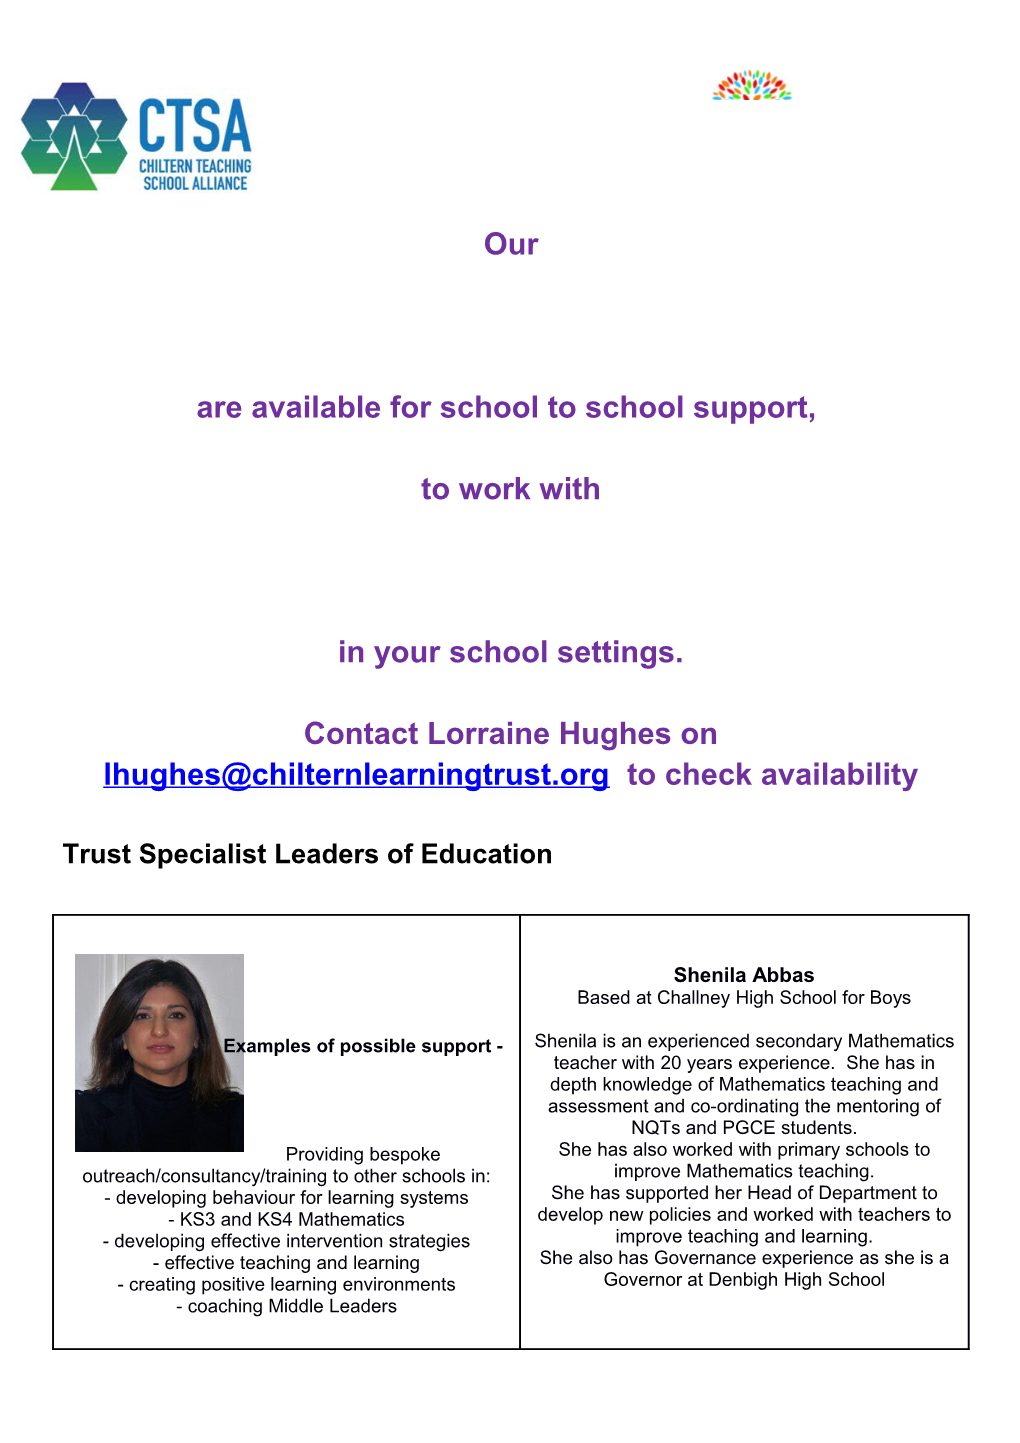 Are Available for School to School Support